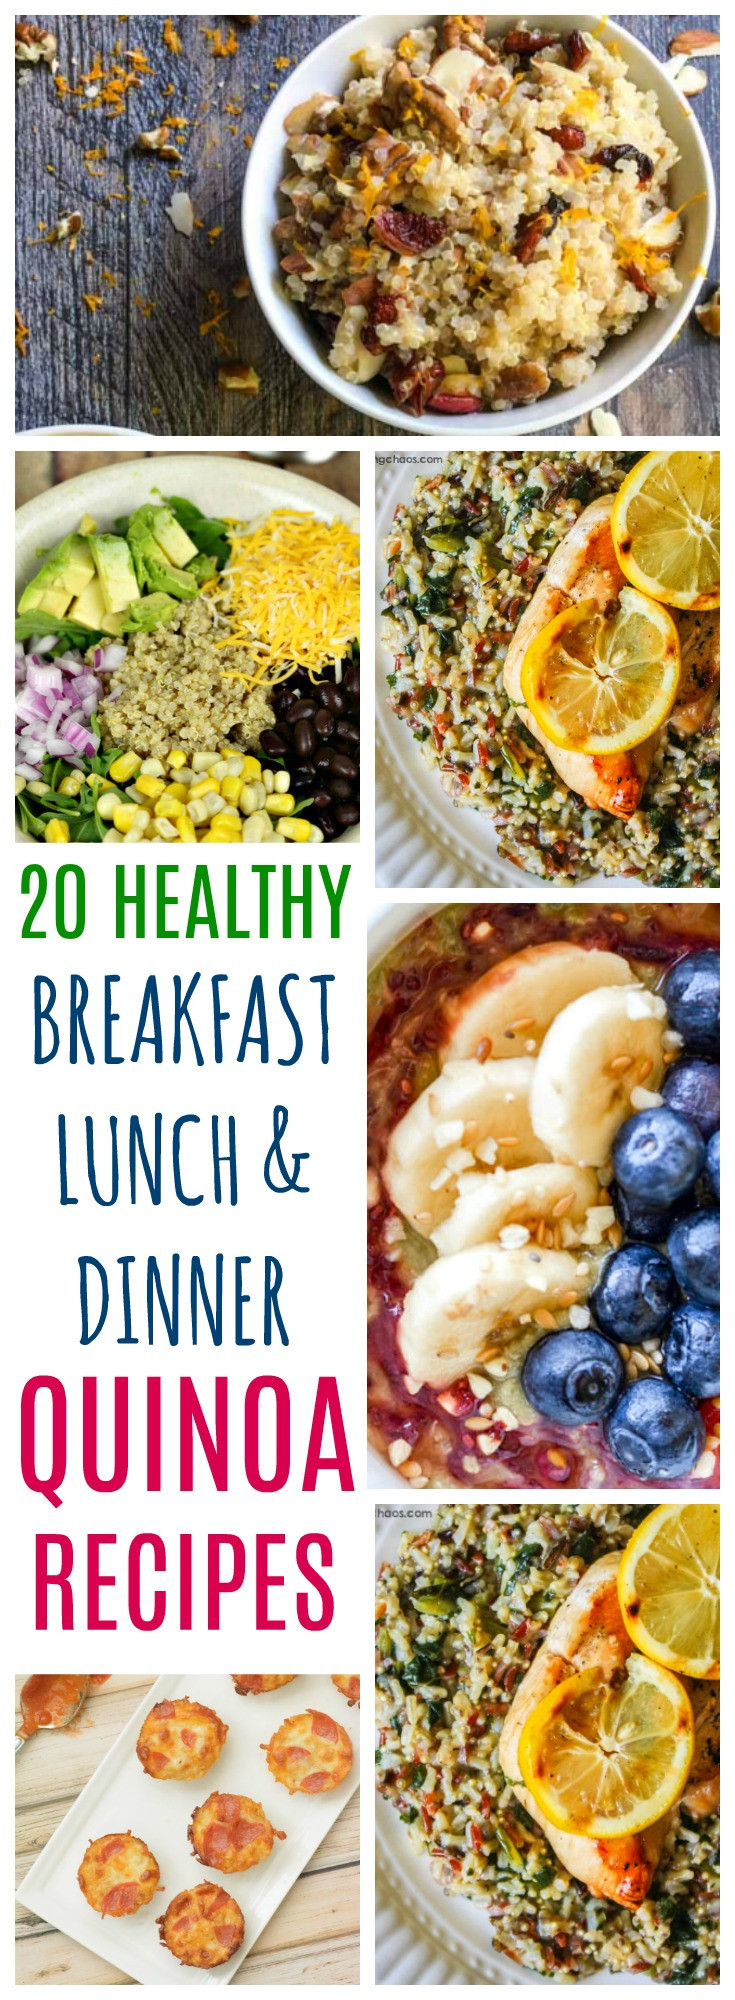 Healthy Recipes For Breakfast Lunch And Dinner
 20 Healthy Quinoa Recipes For Breakfast Lunch and Dinner